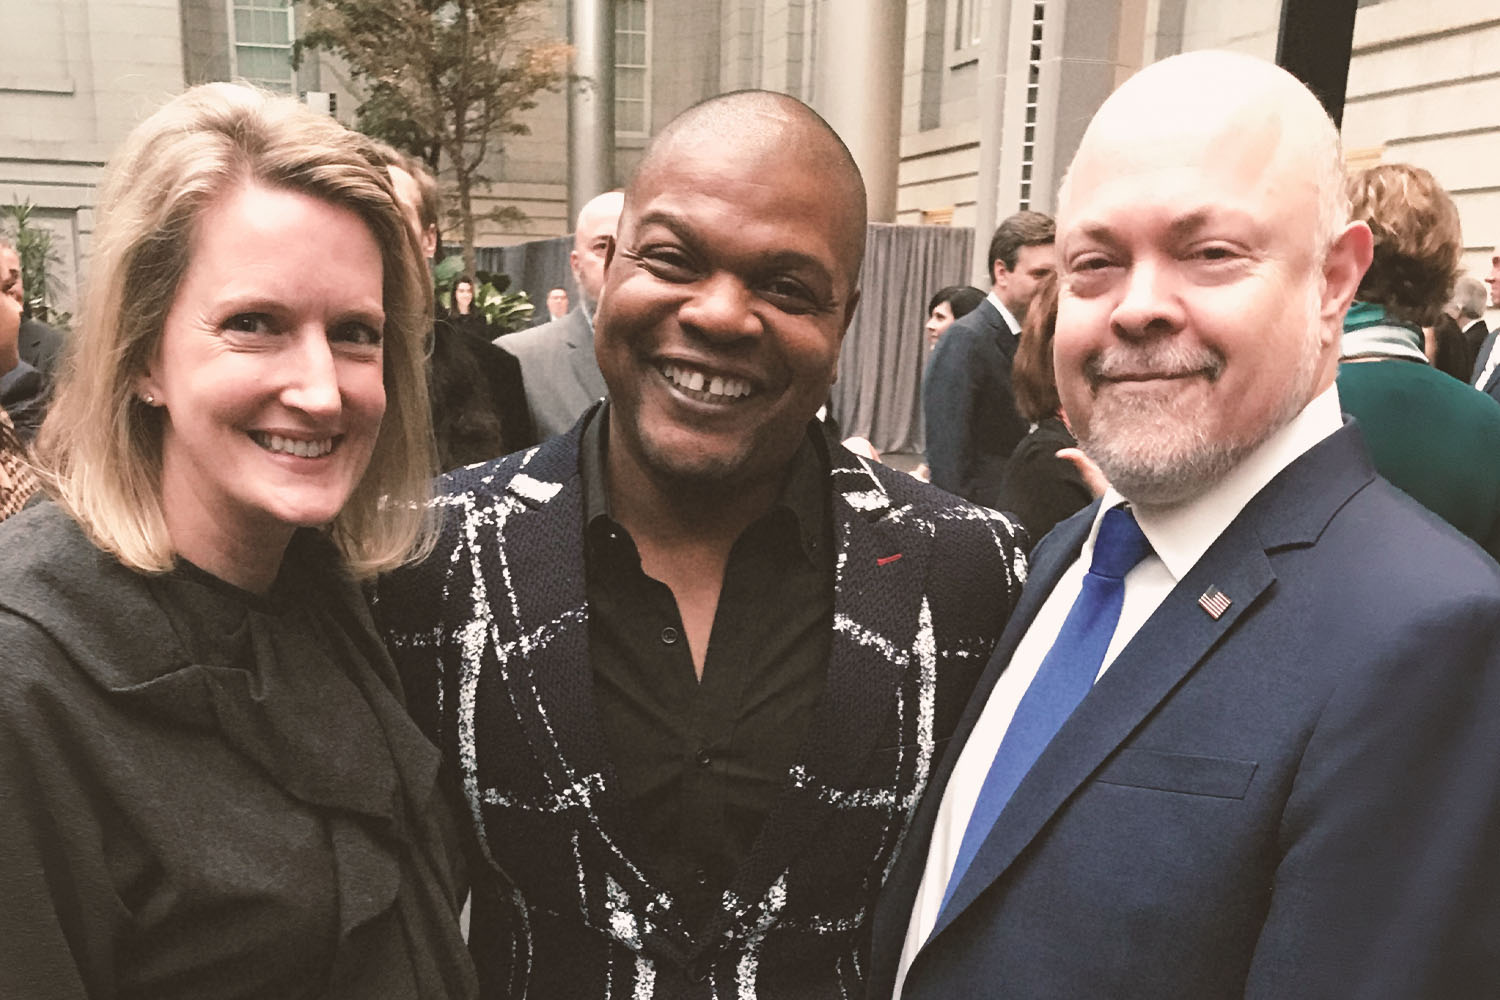 Julie Roberts, Kehinde Wiley and Bennett Roberts at the President Barack Obama portrait unveiling, National Portrait Gallery, Washington D.C., 2018